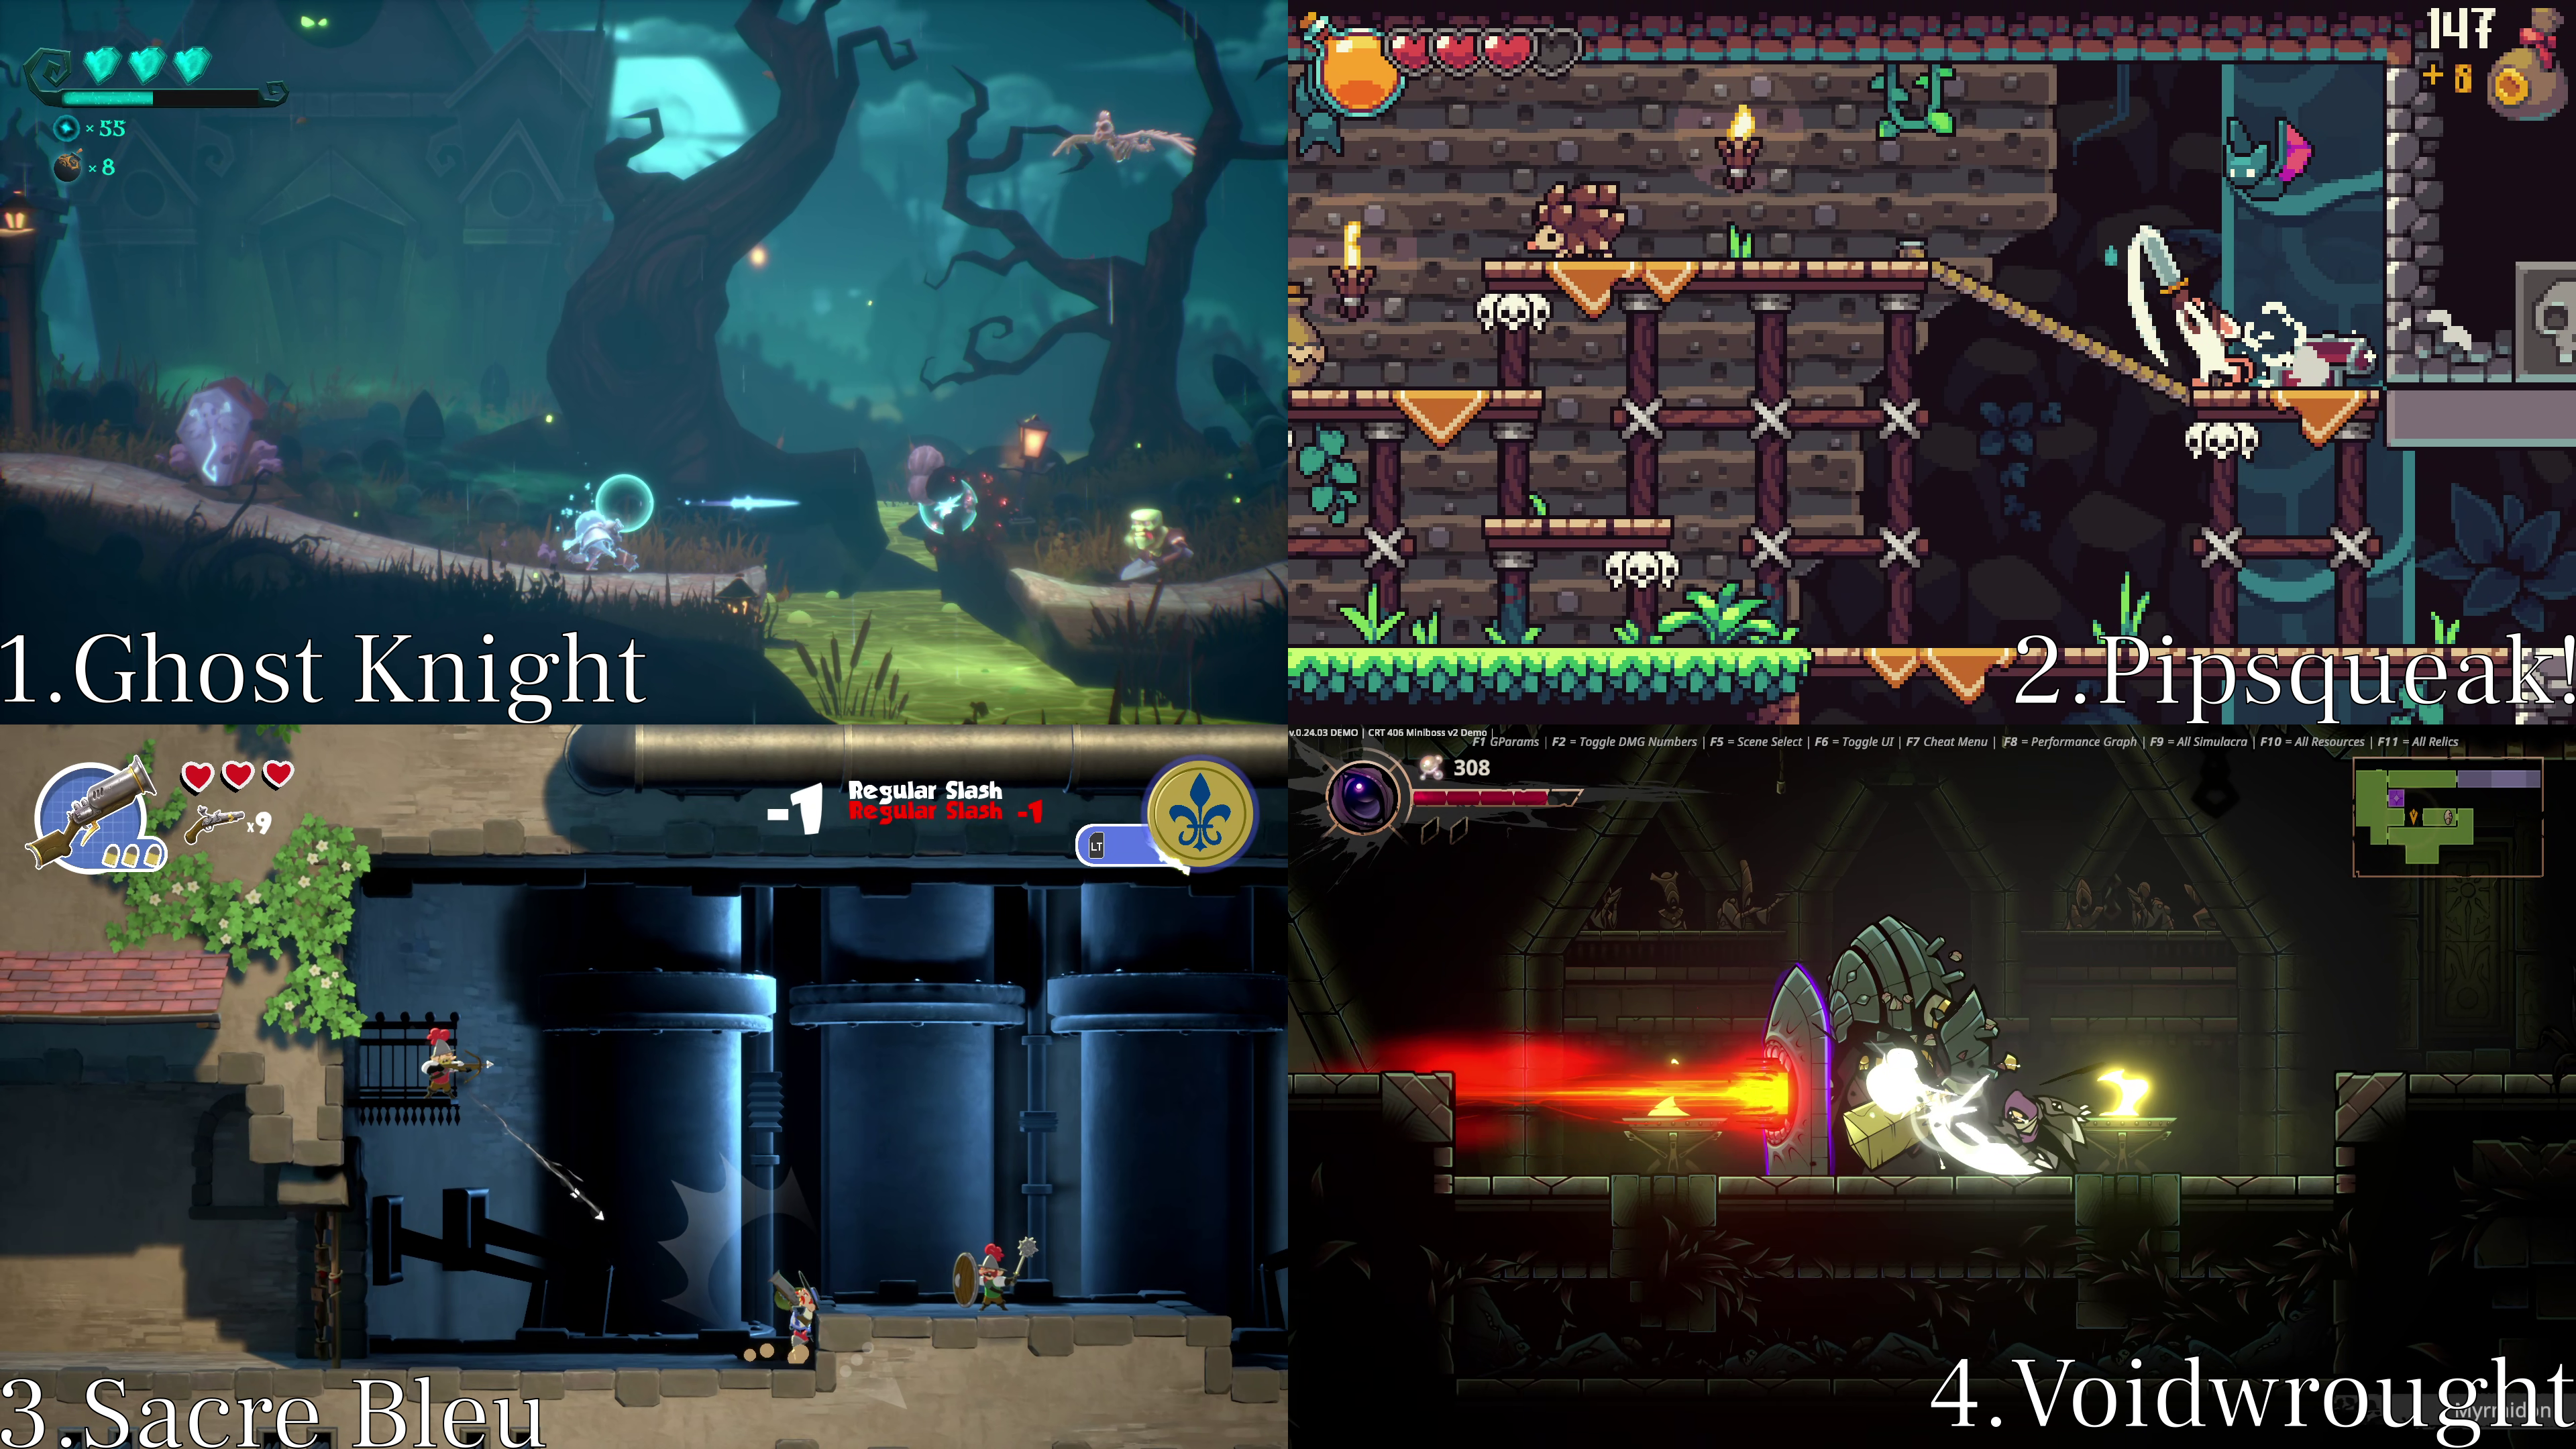 Screenshots of the games Ghost Knight, Pipsqueak, Sacre Bleu, and Voidwrought